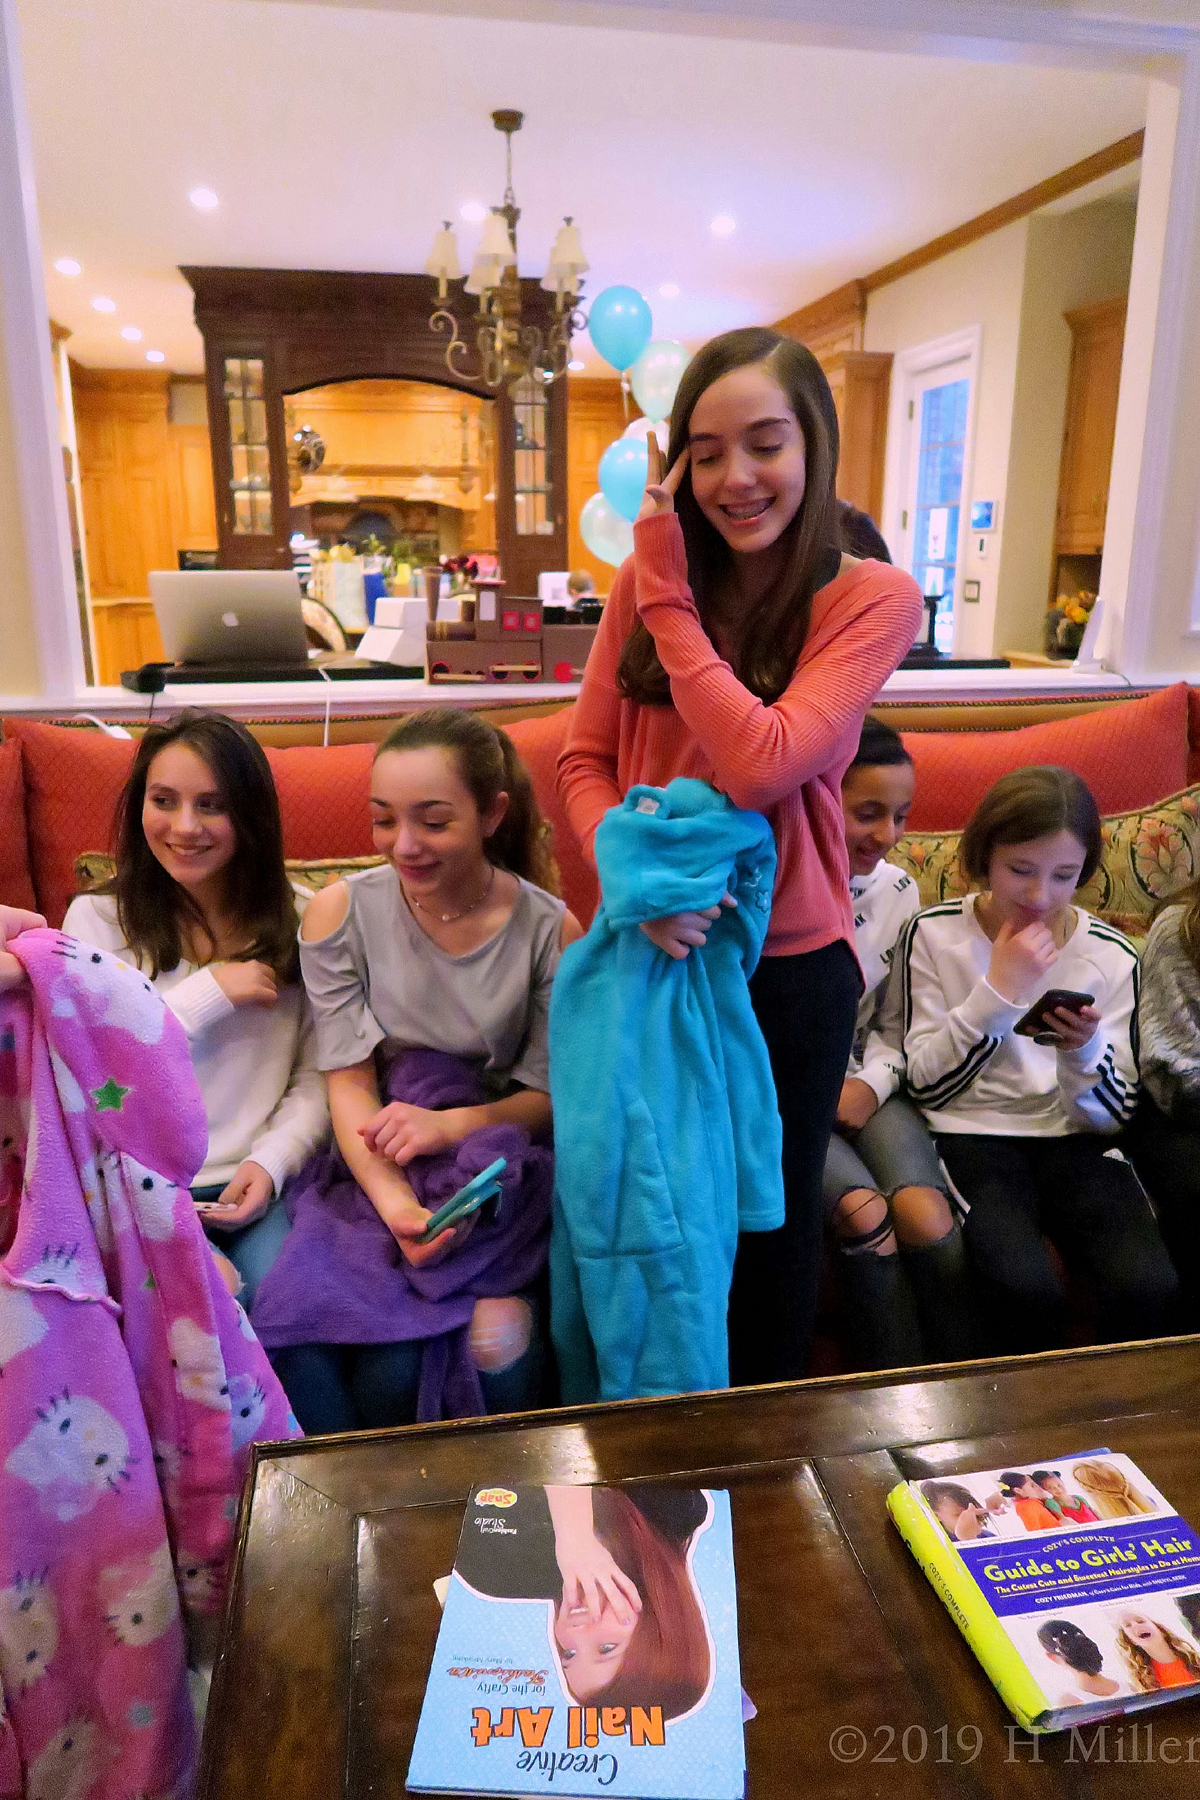 Choosing Their Favorite Spa Robes For The Spa Party! 